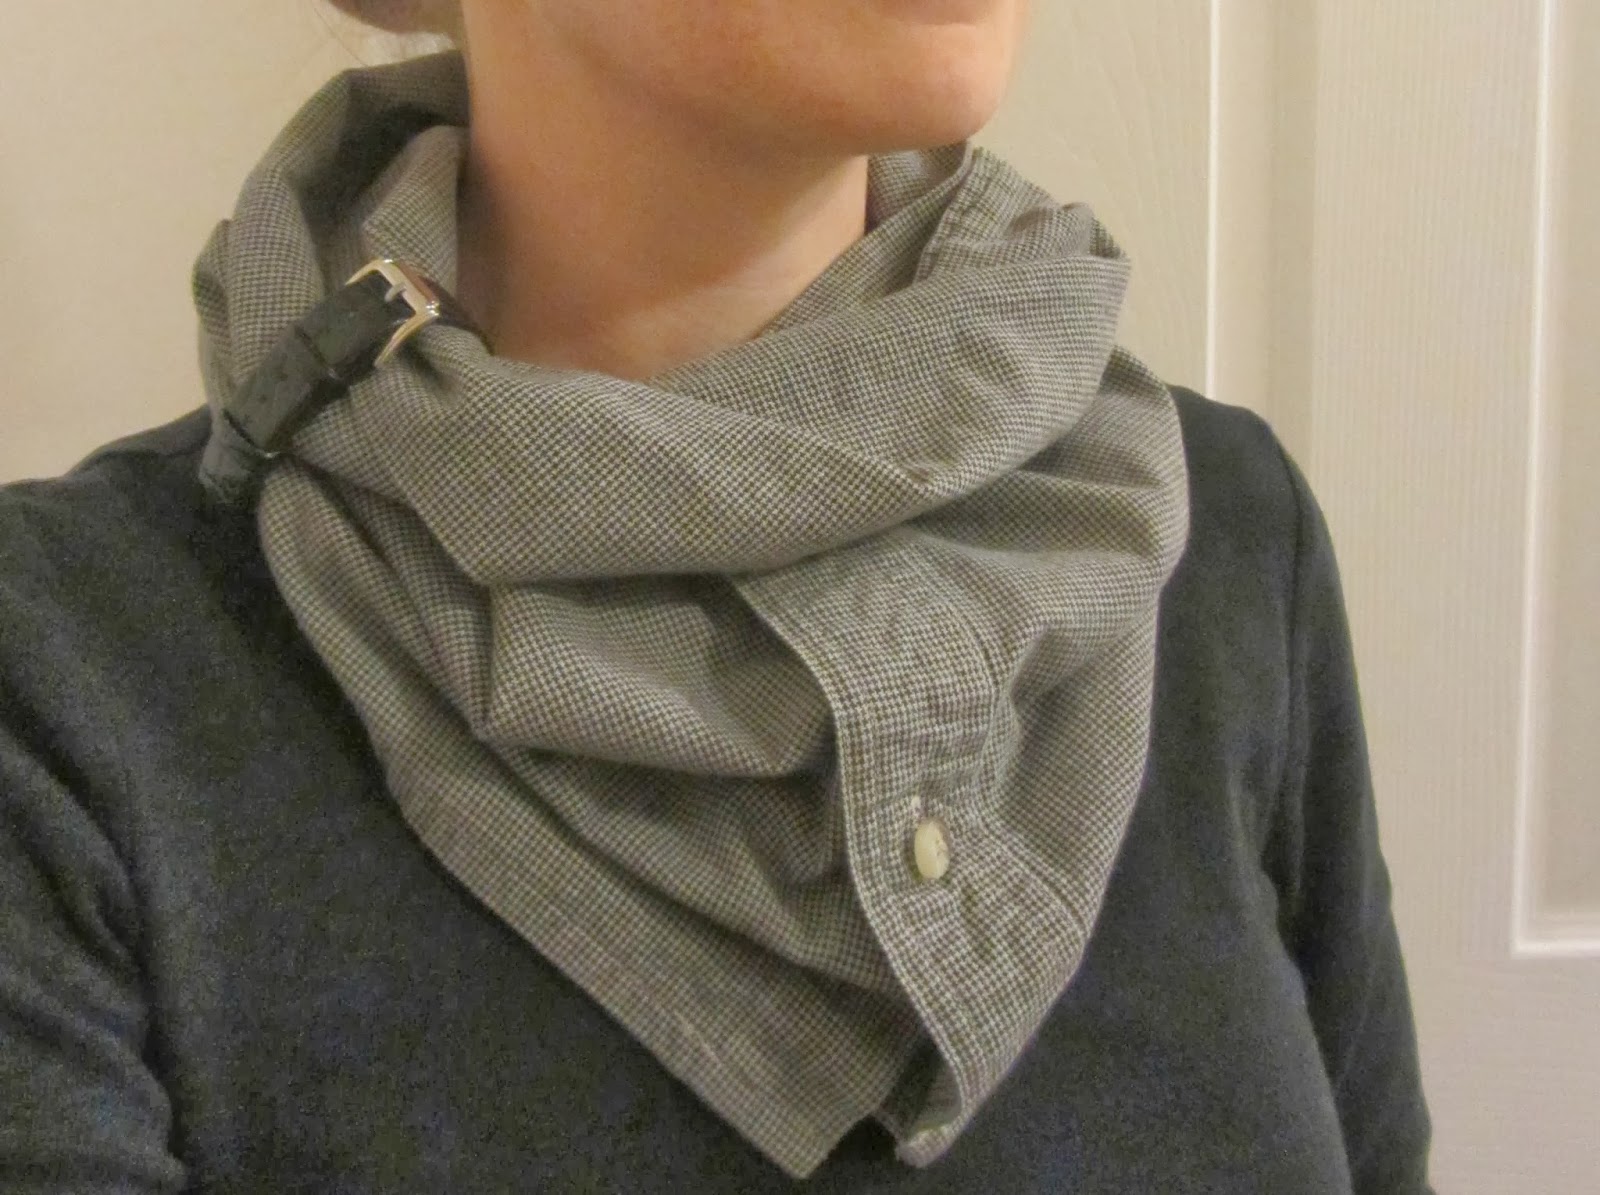 Refashion Co-op: 10 minute project: men's shirt into infinity scarf